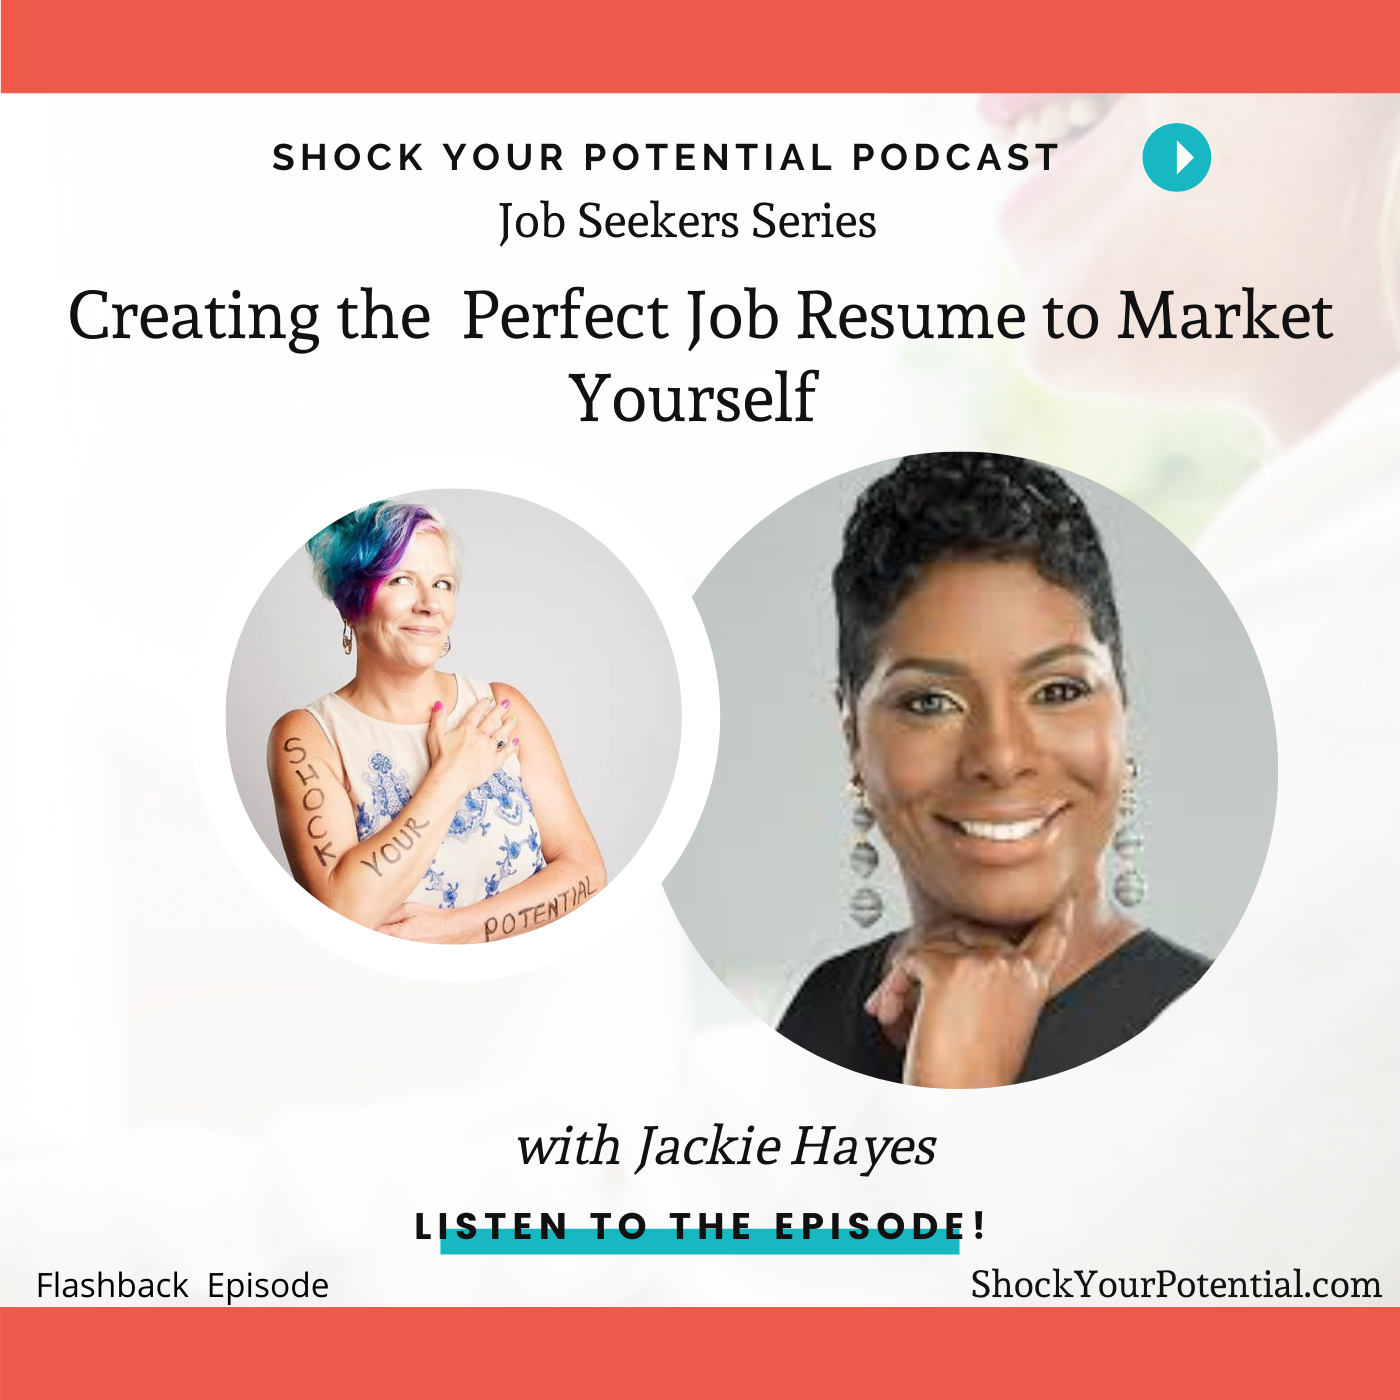 Creating the Perfect Job Resume to Market Yourself – Jackie Hayes